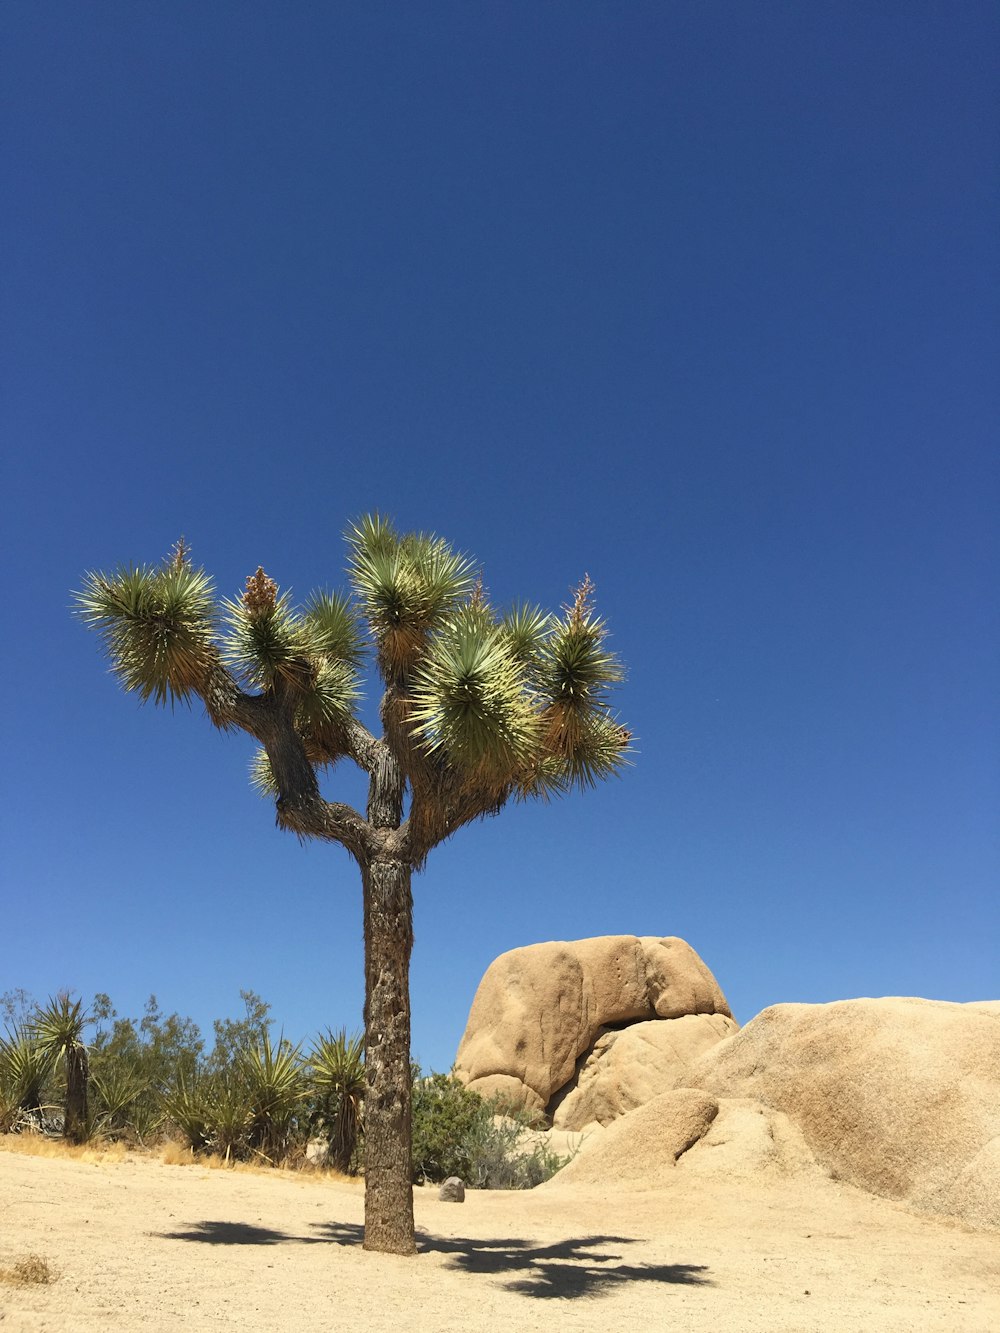 Green palm tree near brown rock formation under blue sky during daytime  photo – Free Nature Image on Unsplash